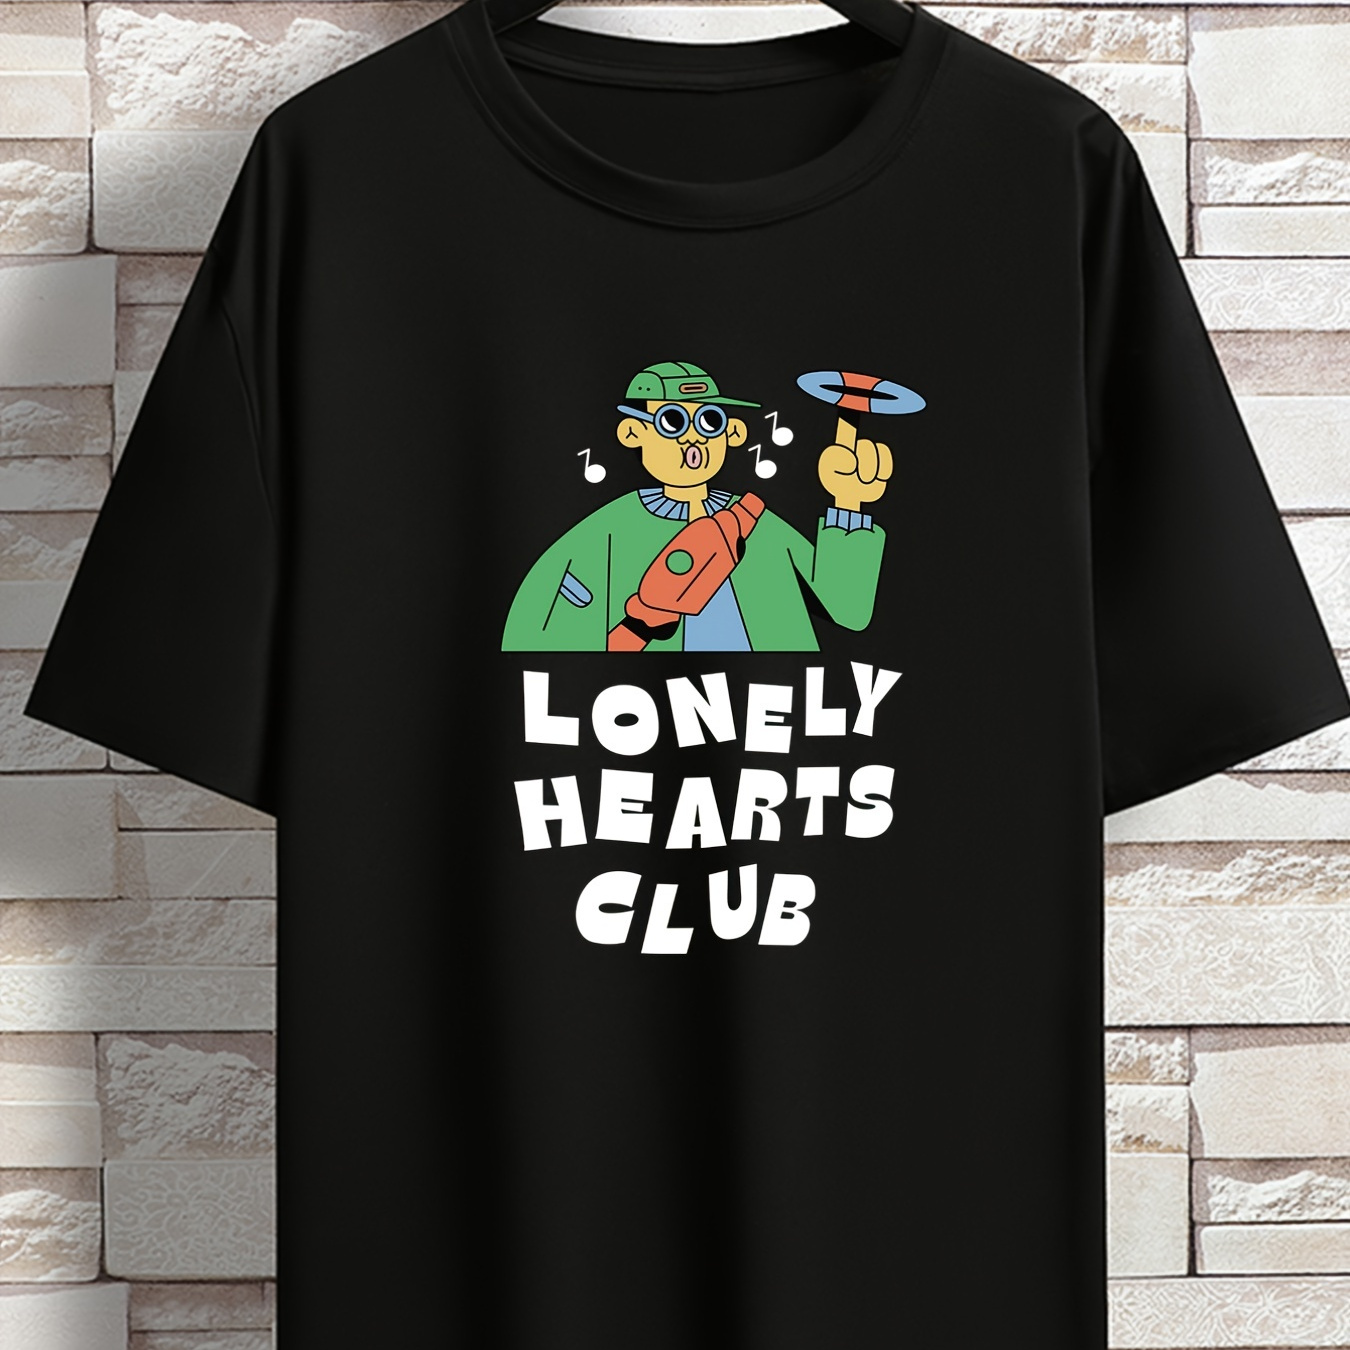 

Men's Plus Size 'lonely Hearts Club' Print Stretch T-shirt, Oversized Short Sleeve Tops For Spring Summer, Causal Loose Clothing For Big And Tall Guys